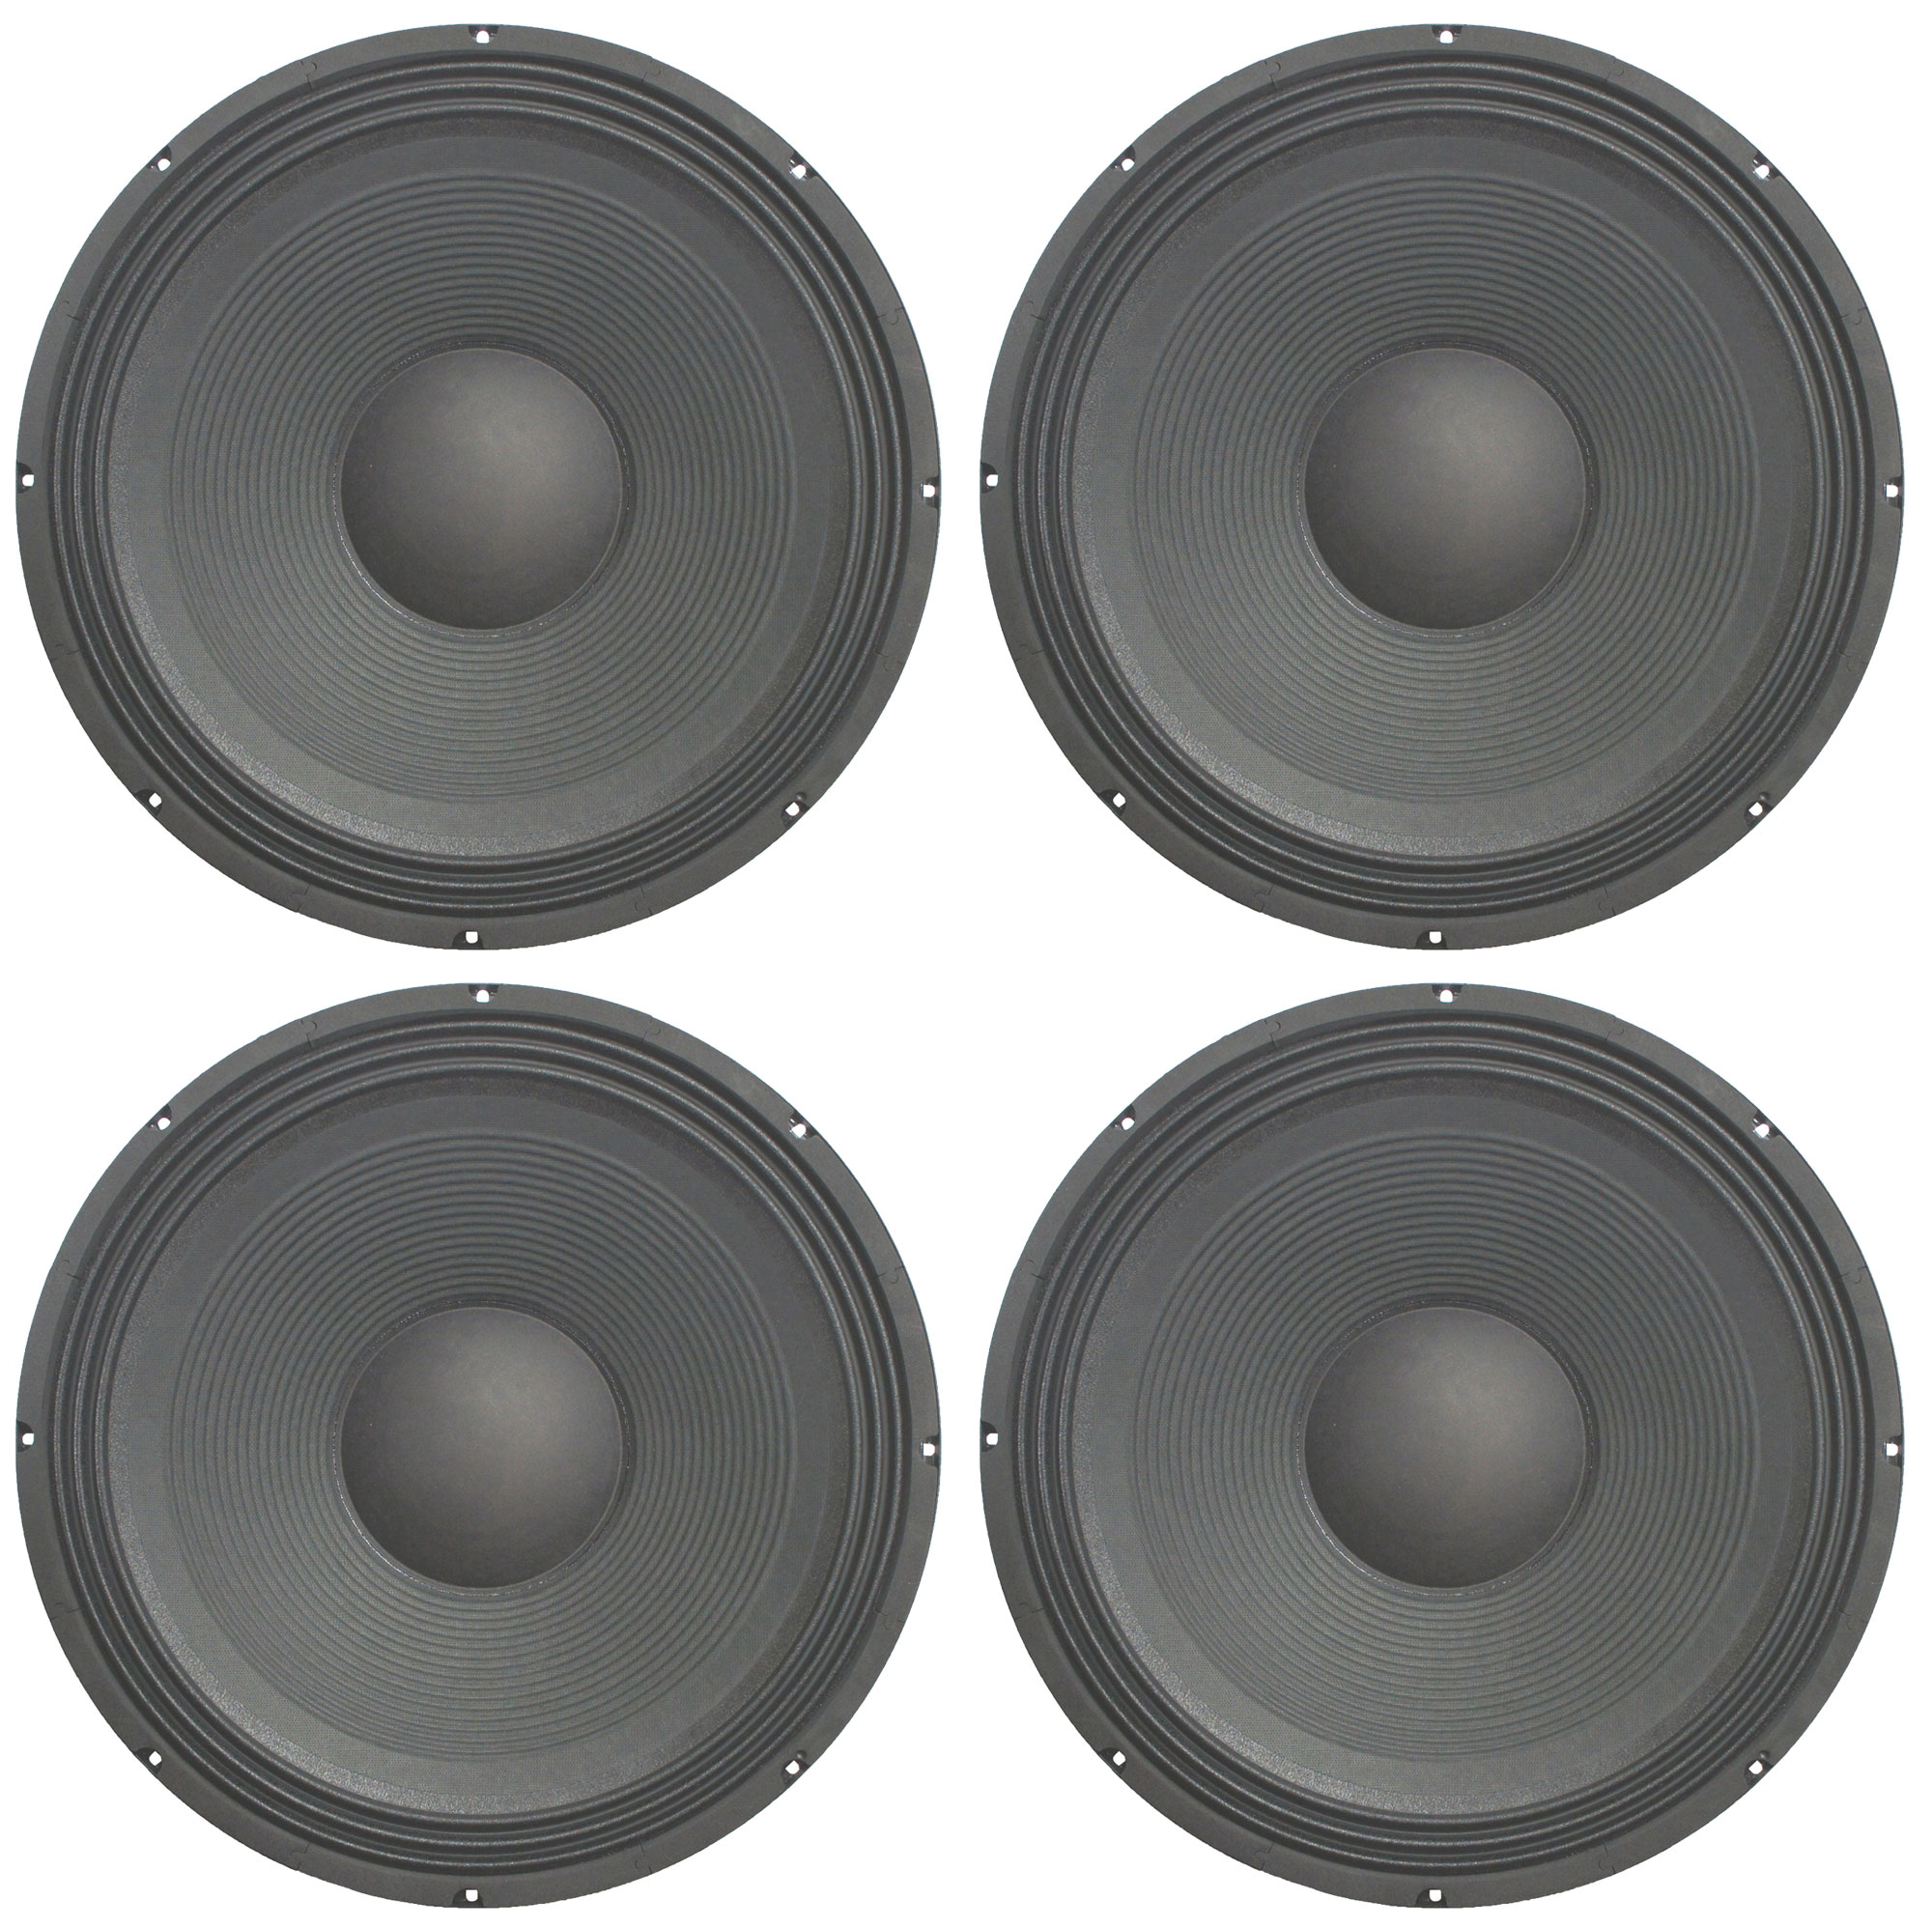 4x Harmony HA-P18"WS8 Raw Replacement 18" Pro PA 1200W Sub Speaker 8 Ohm Woofer - image 1 of 6